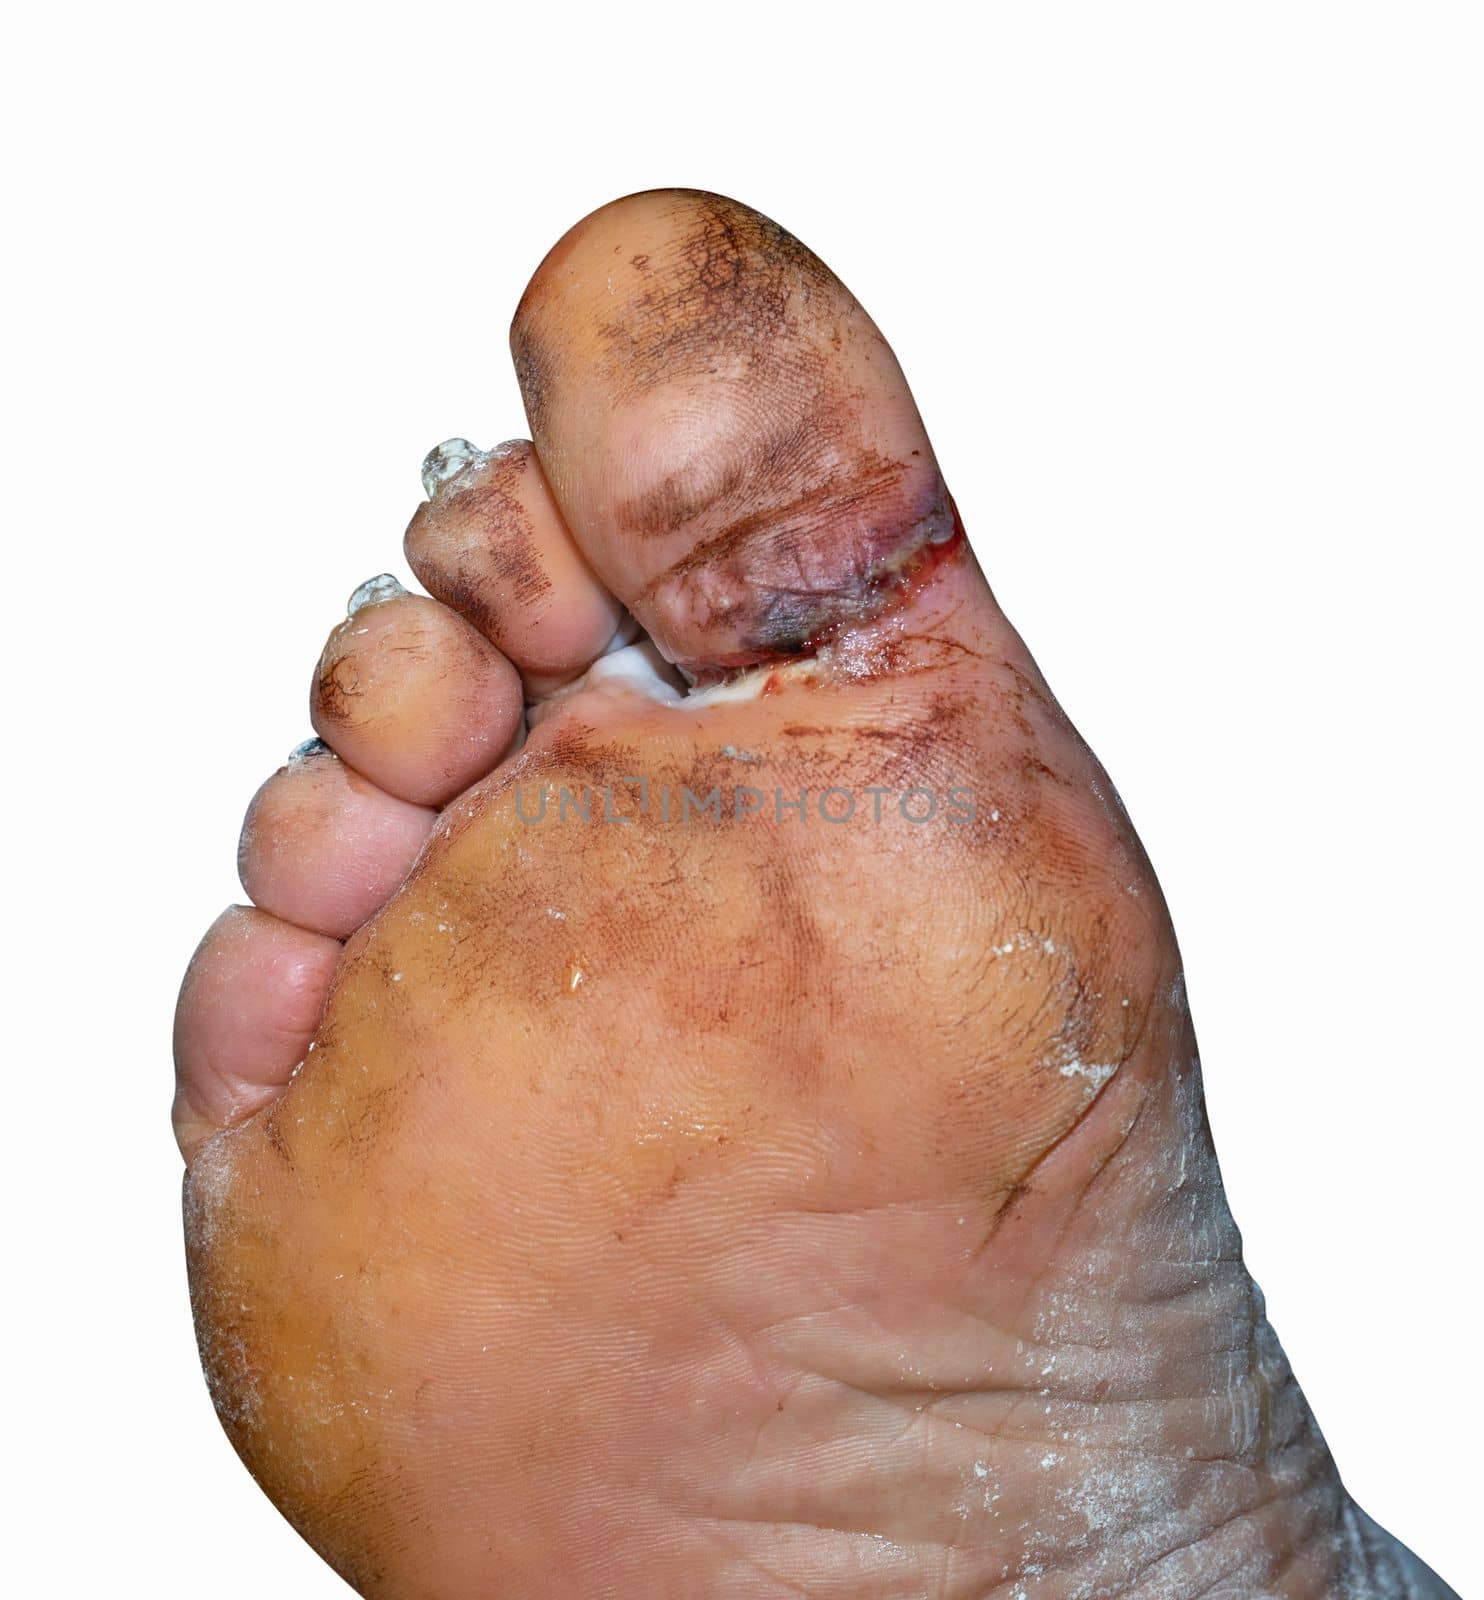 A large laceration between the big toe and the foot.